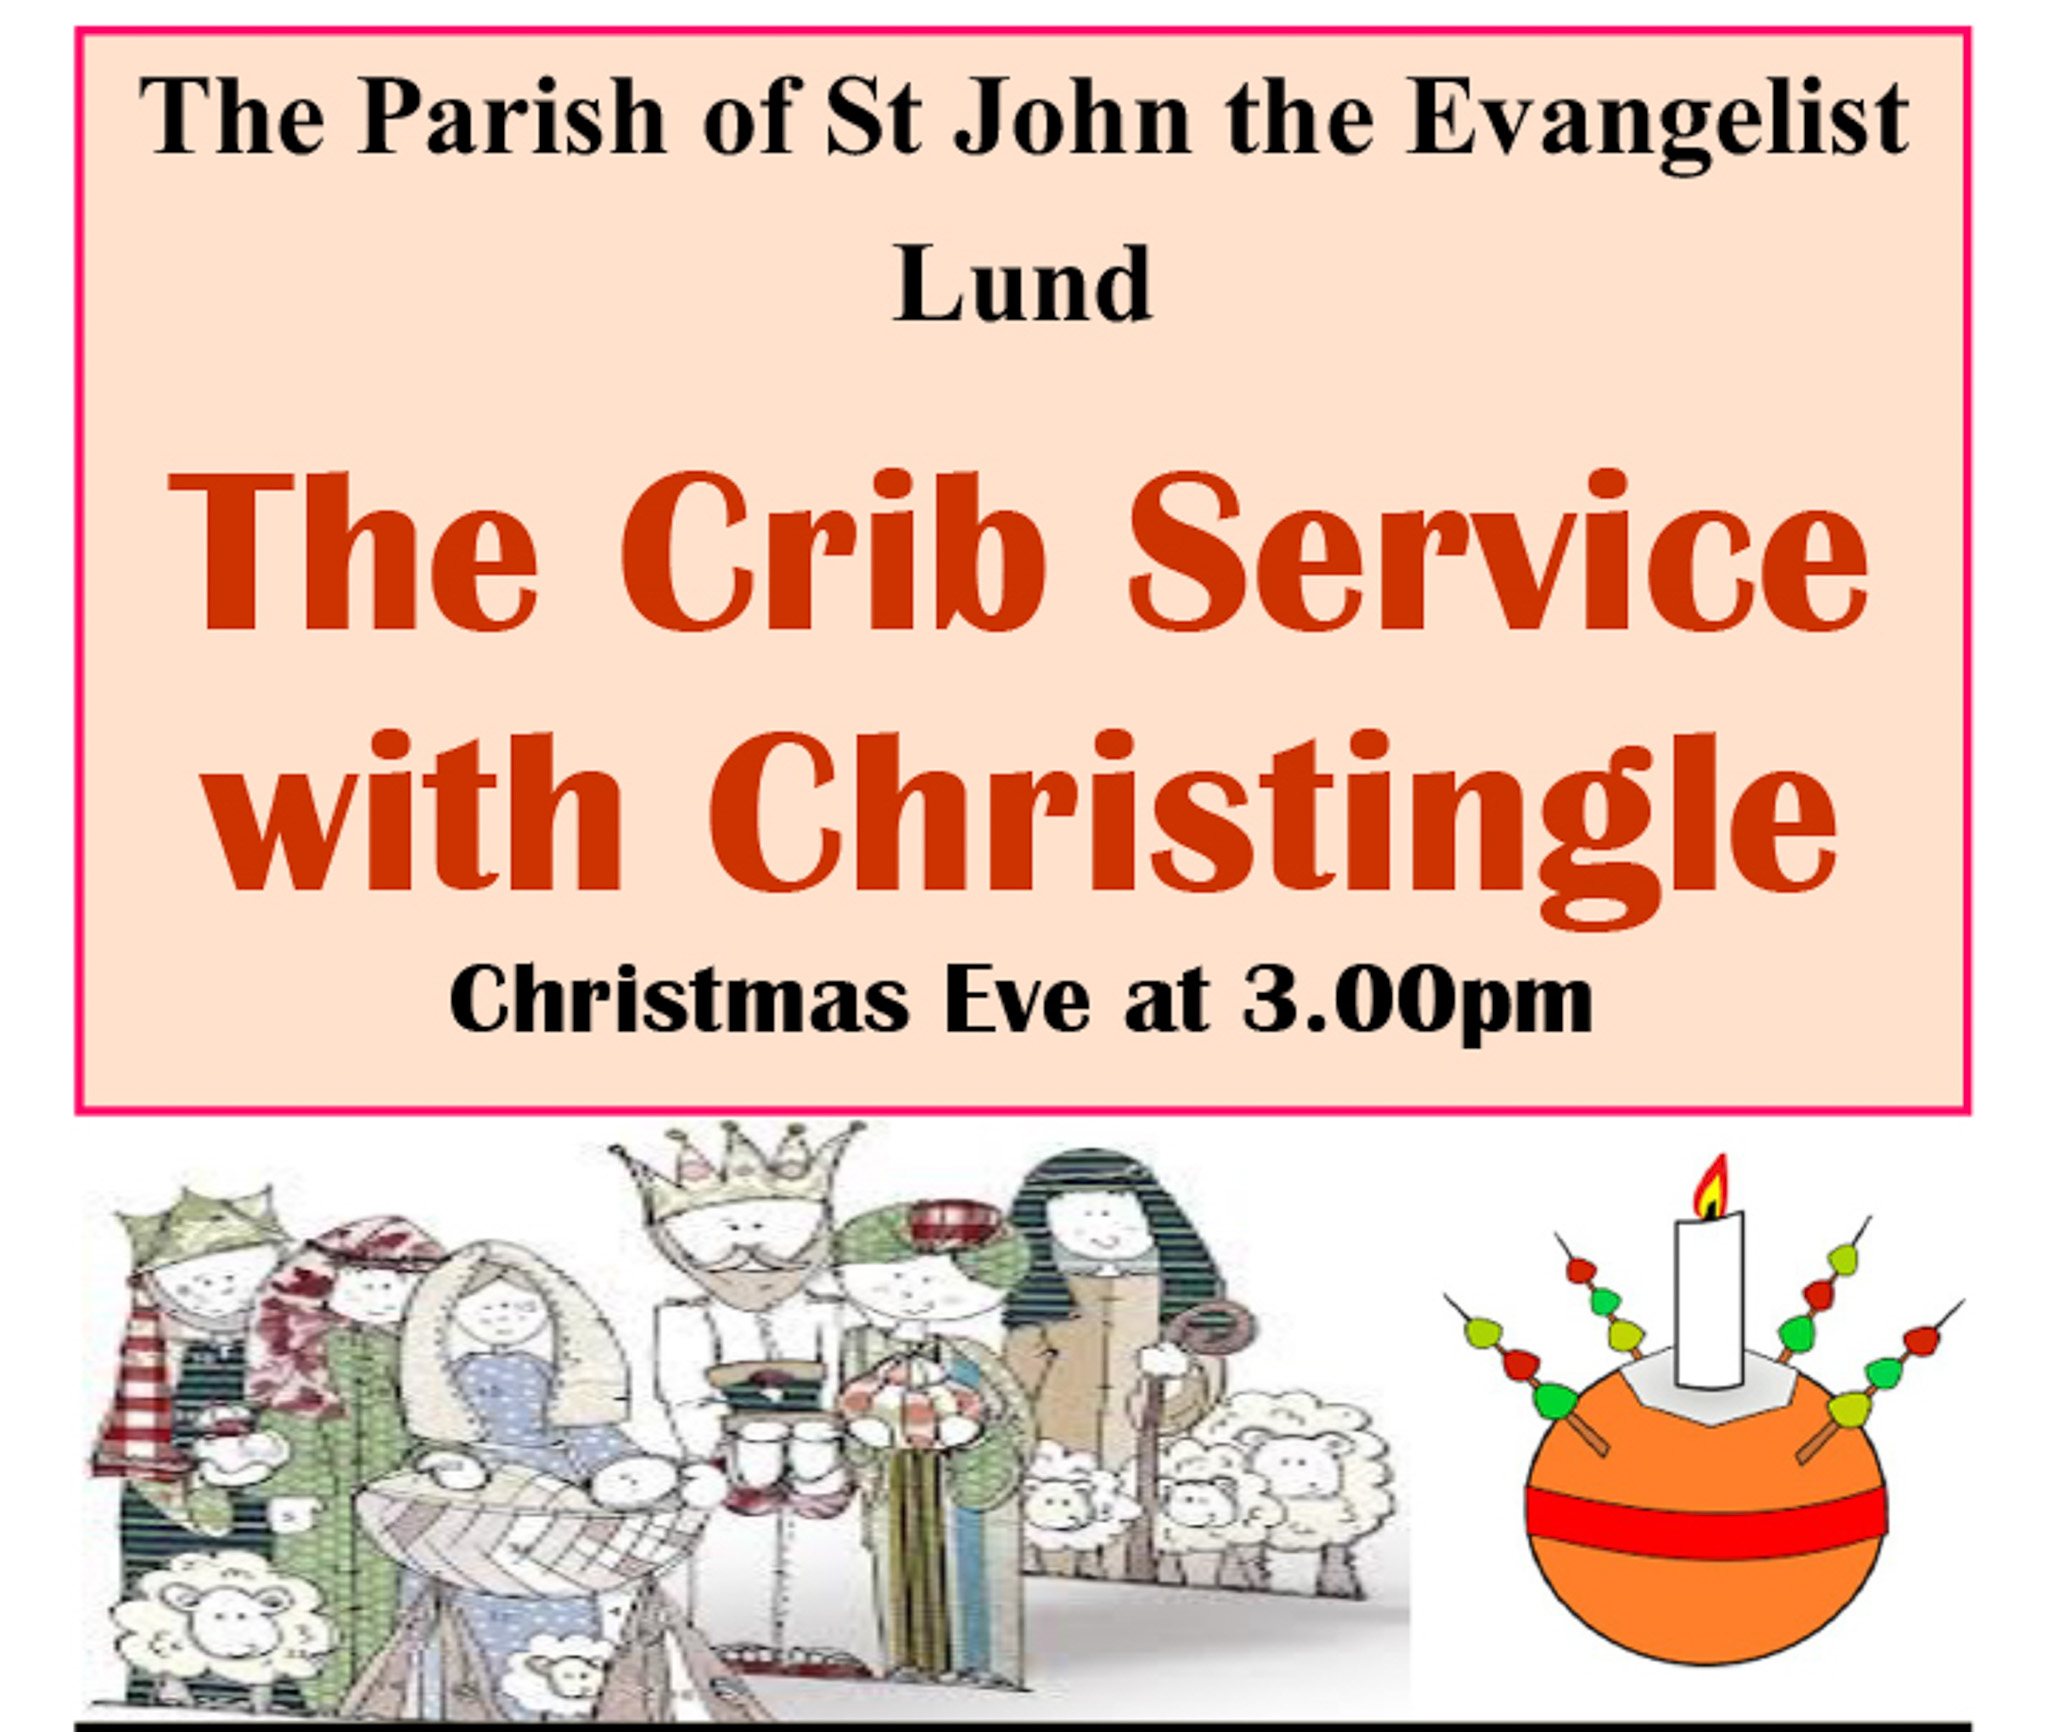 The Crib Service with Christingle on Christmas Eve at 3:00pm